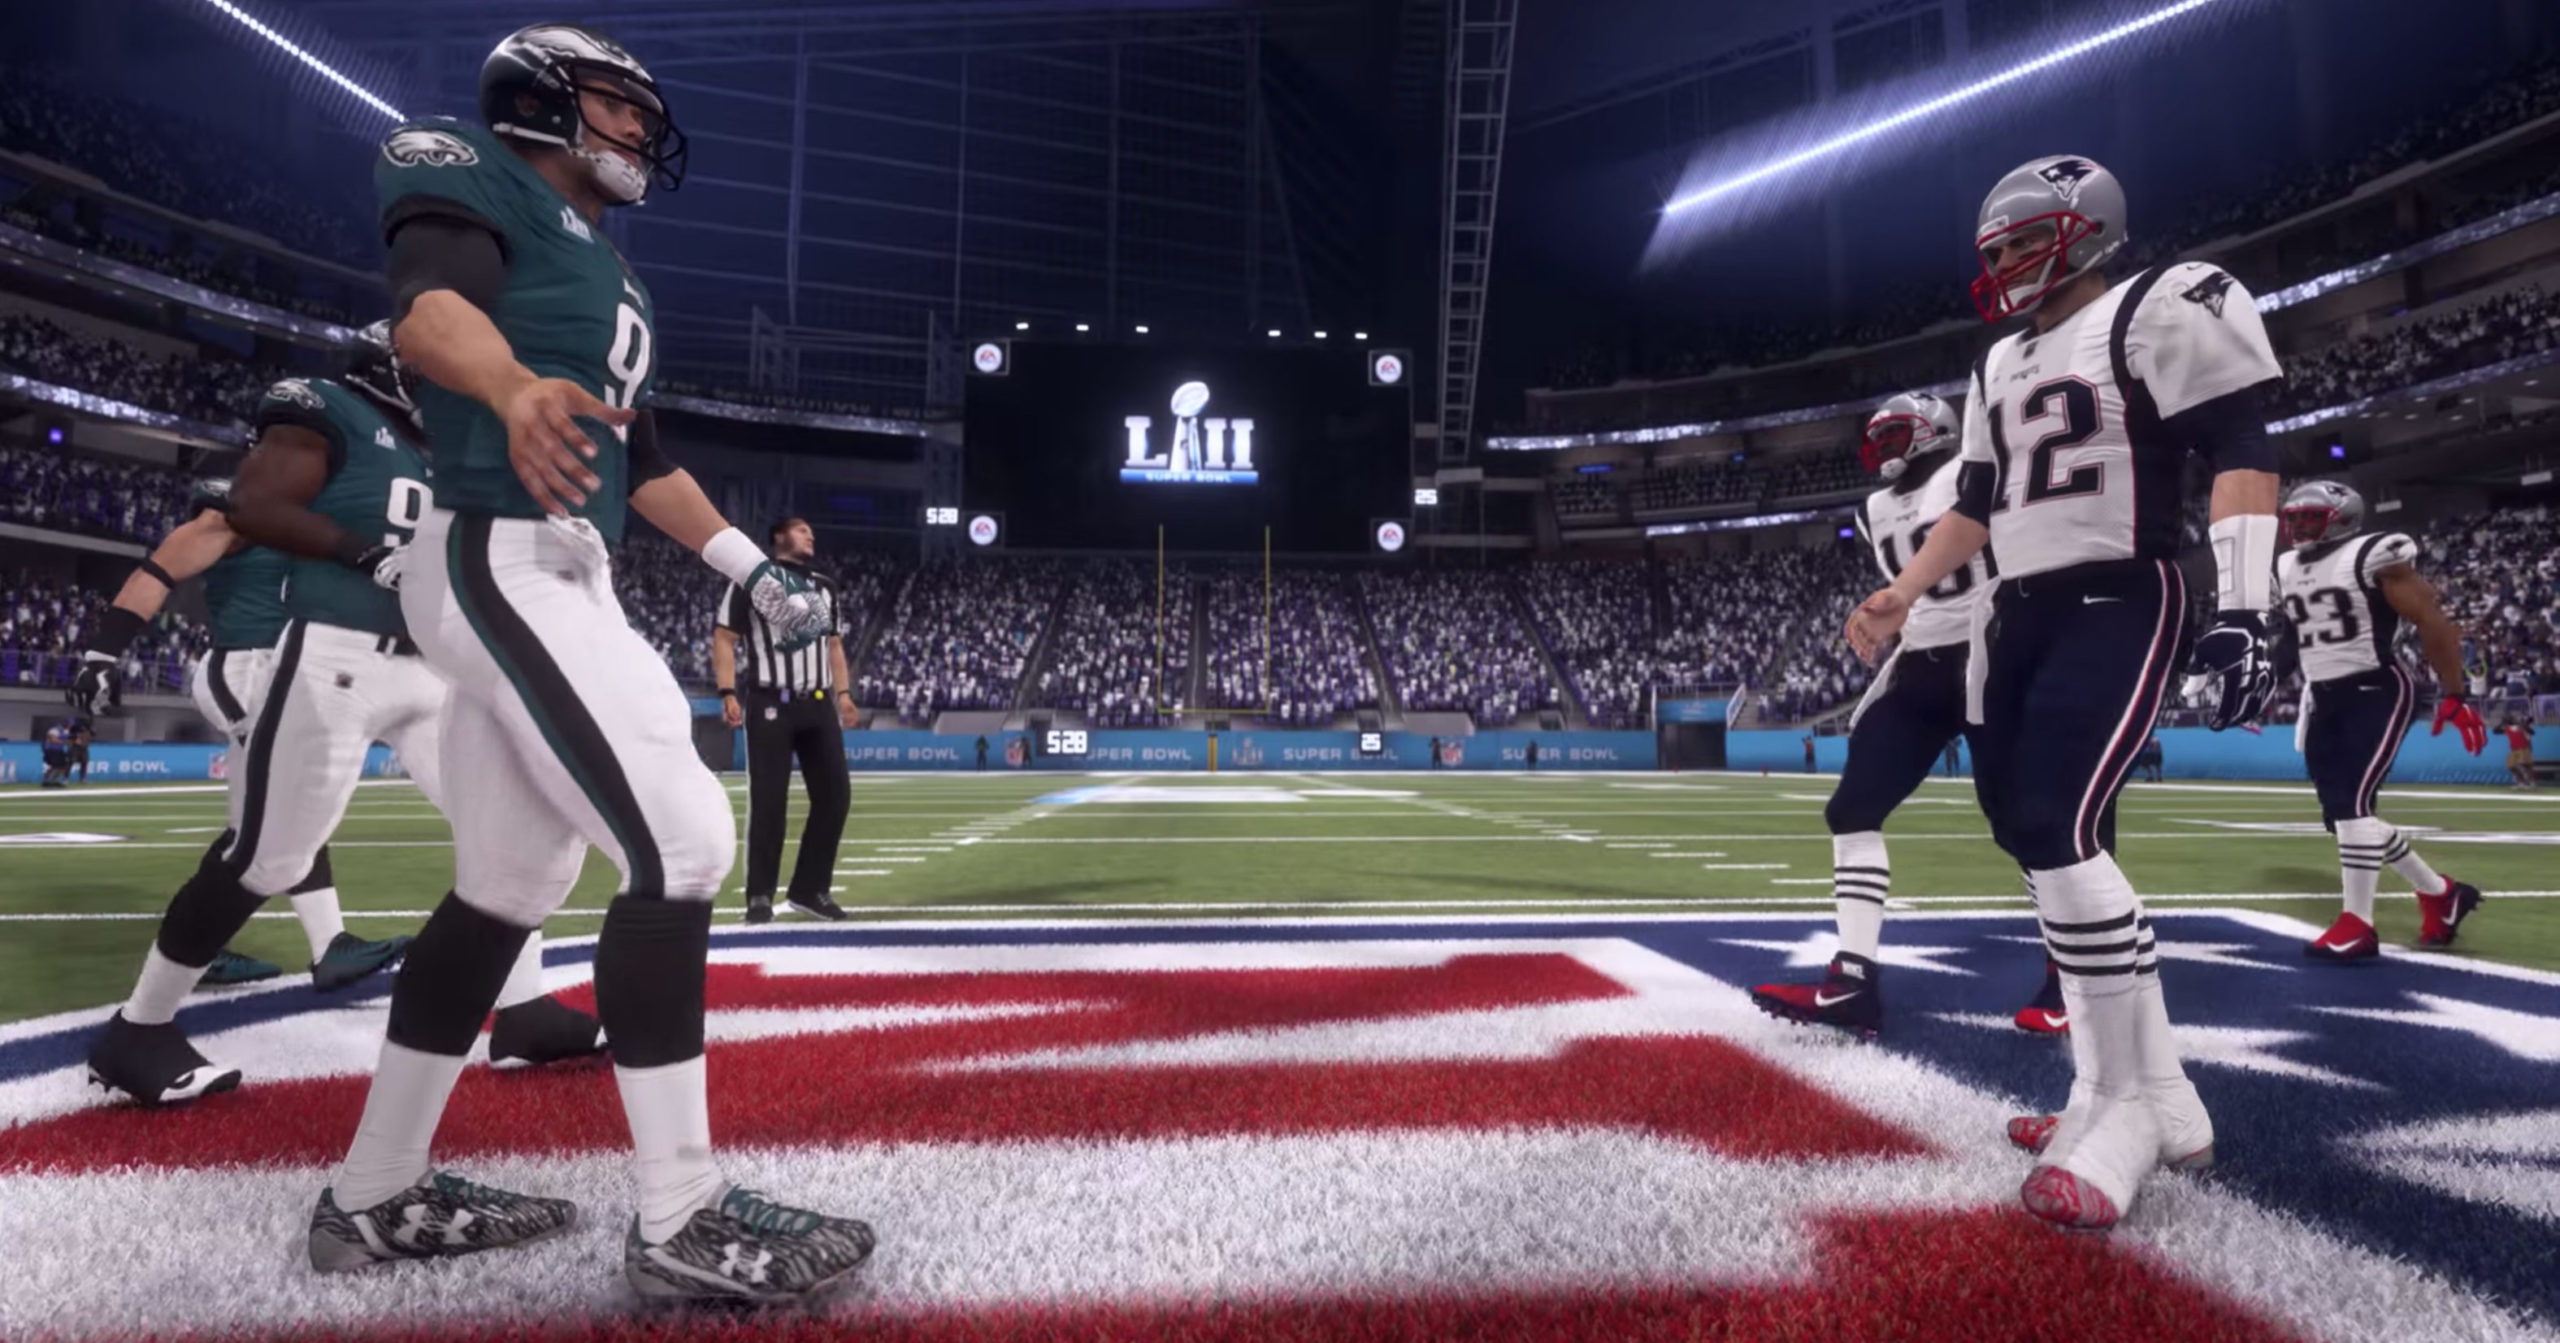 Madden Predicts The Winner Of Patriots vs. Eagles With Super Bowl LII